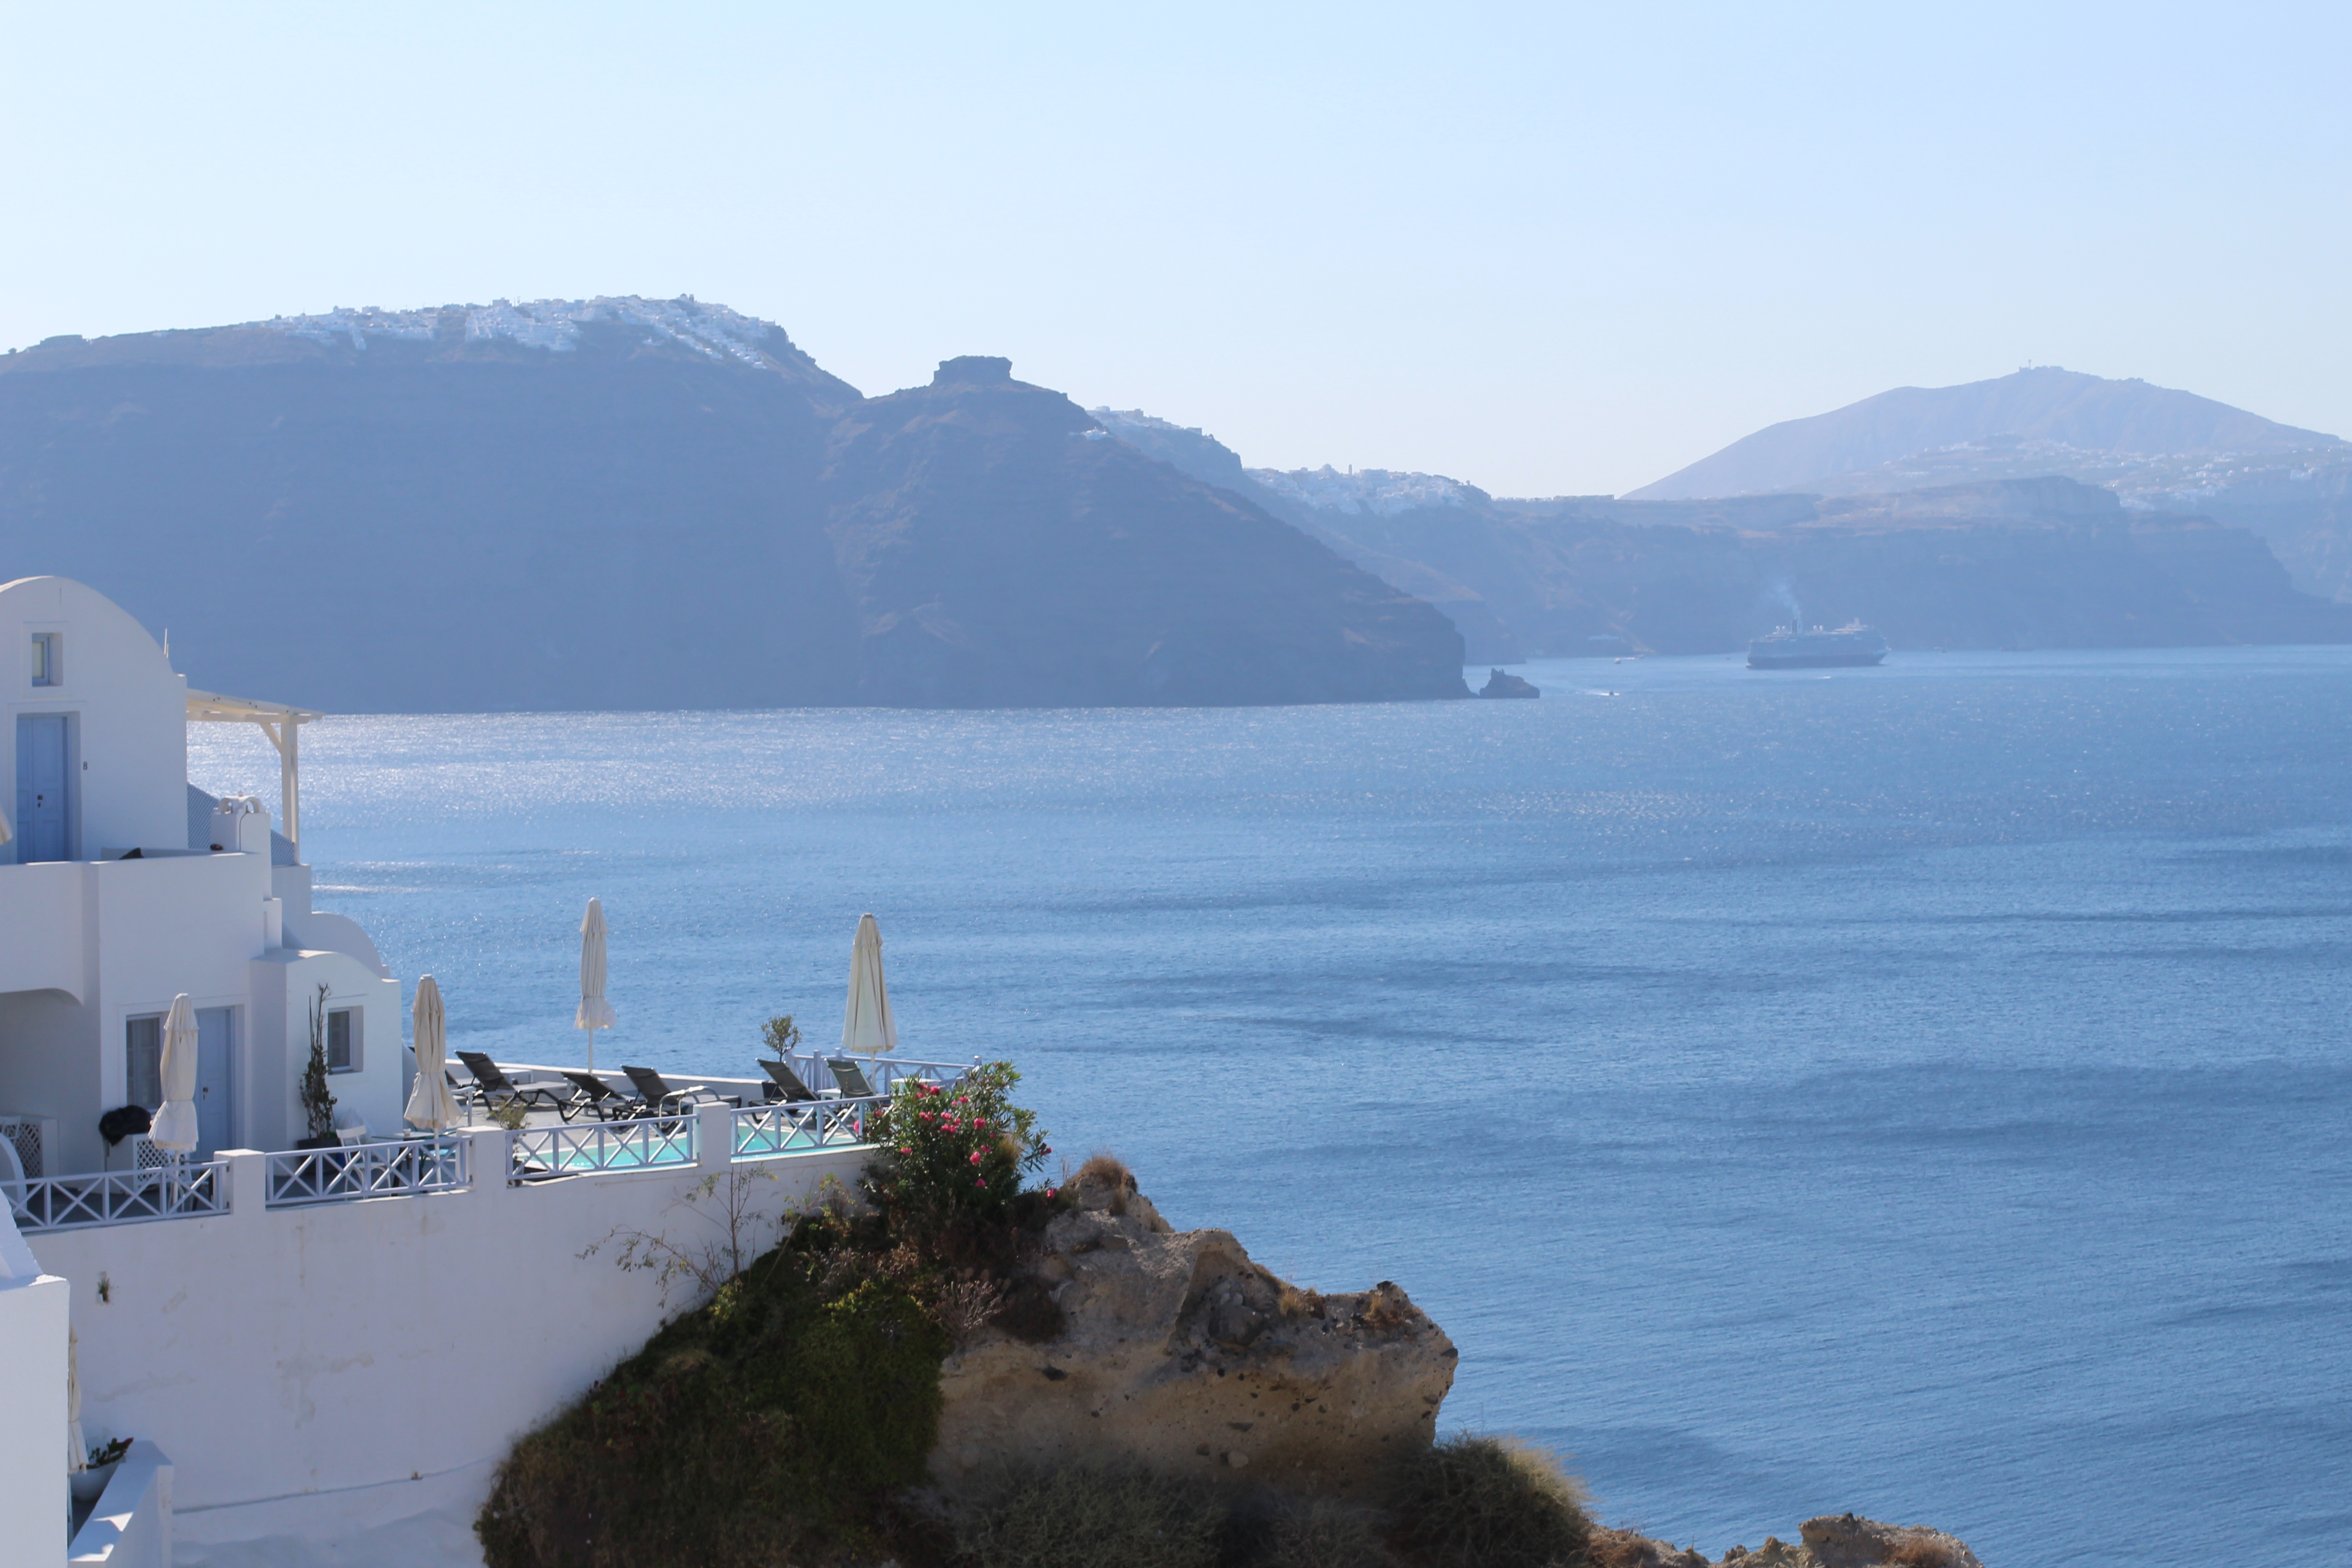 views from the andronis hotel oia greece